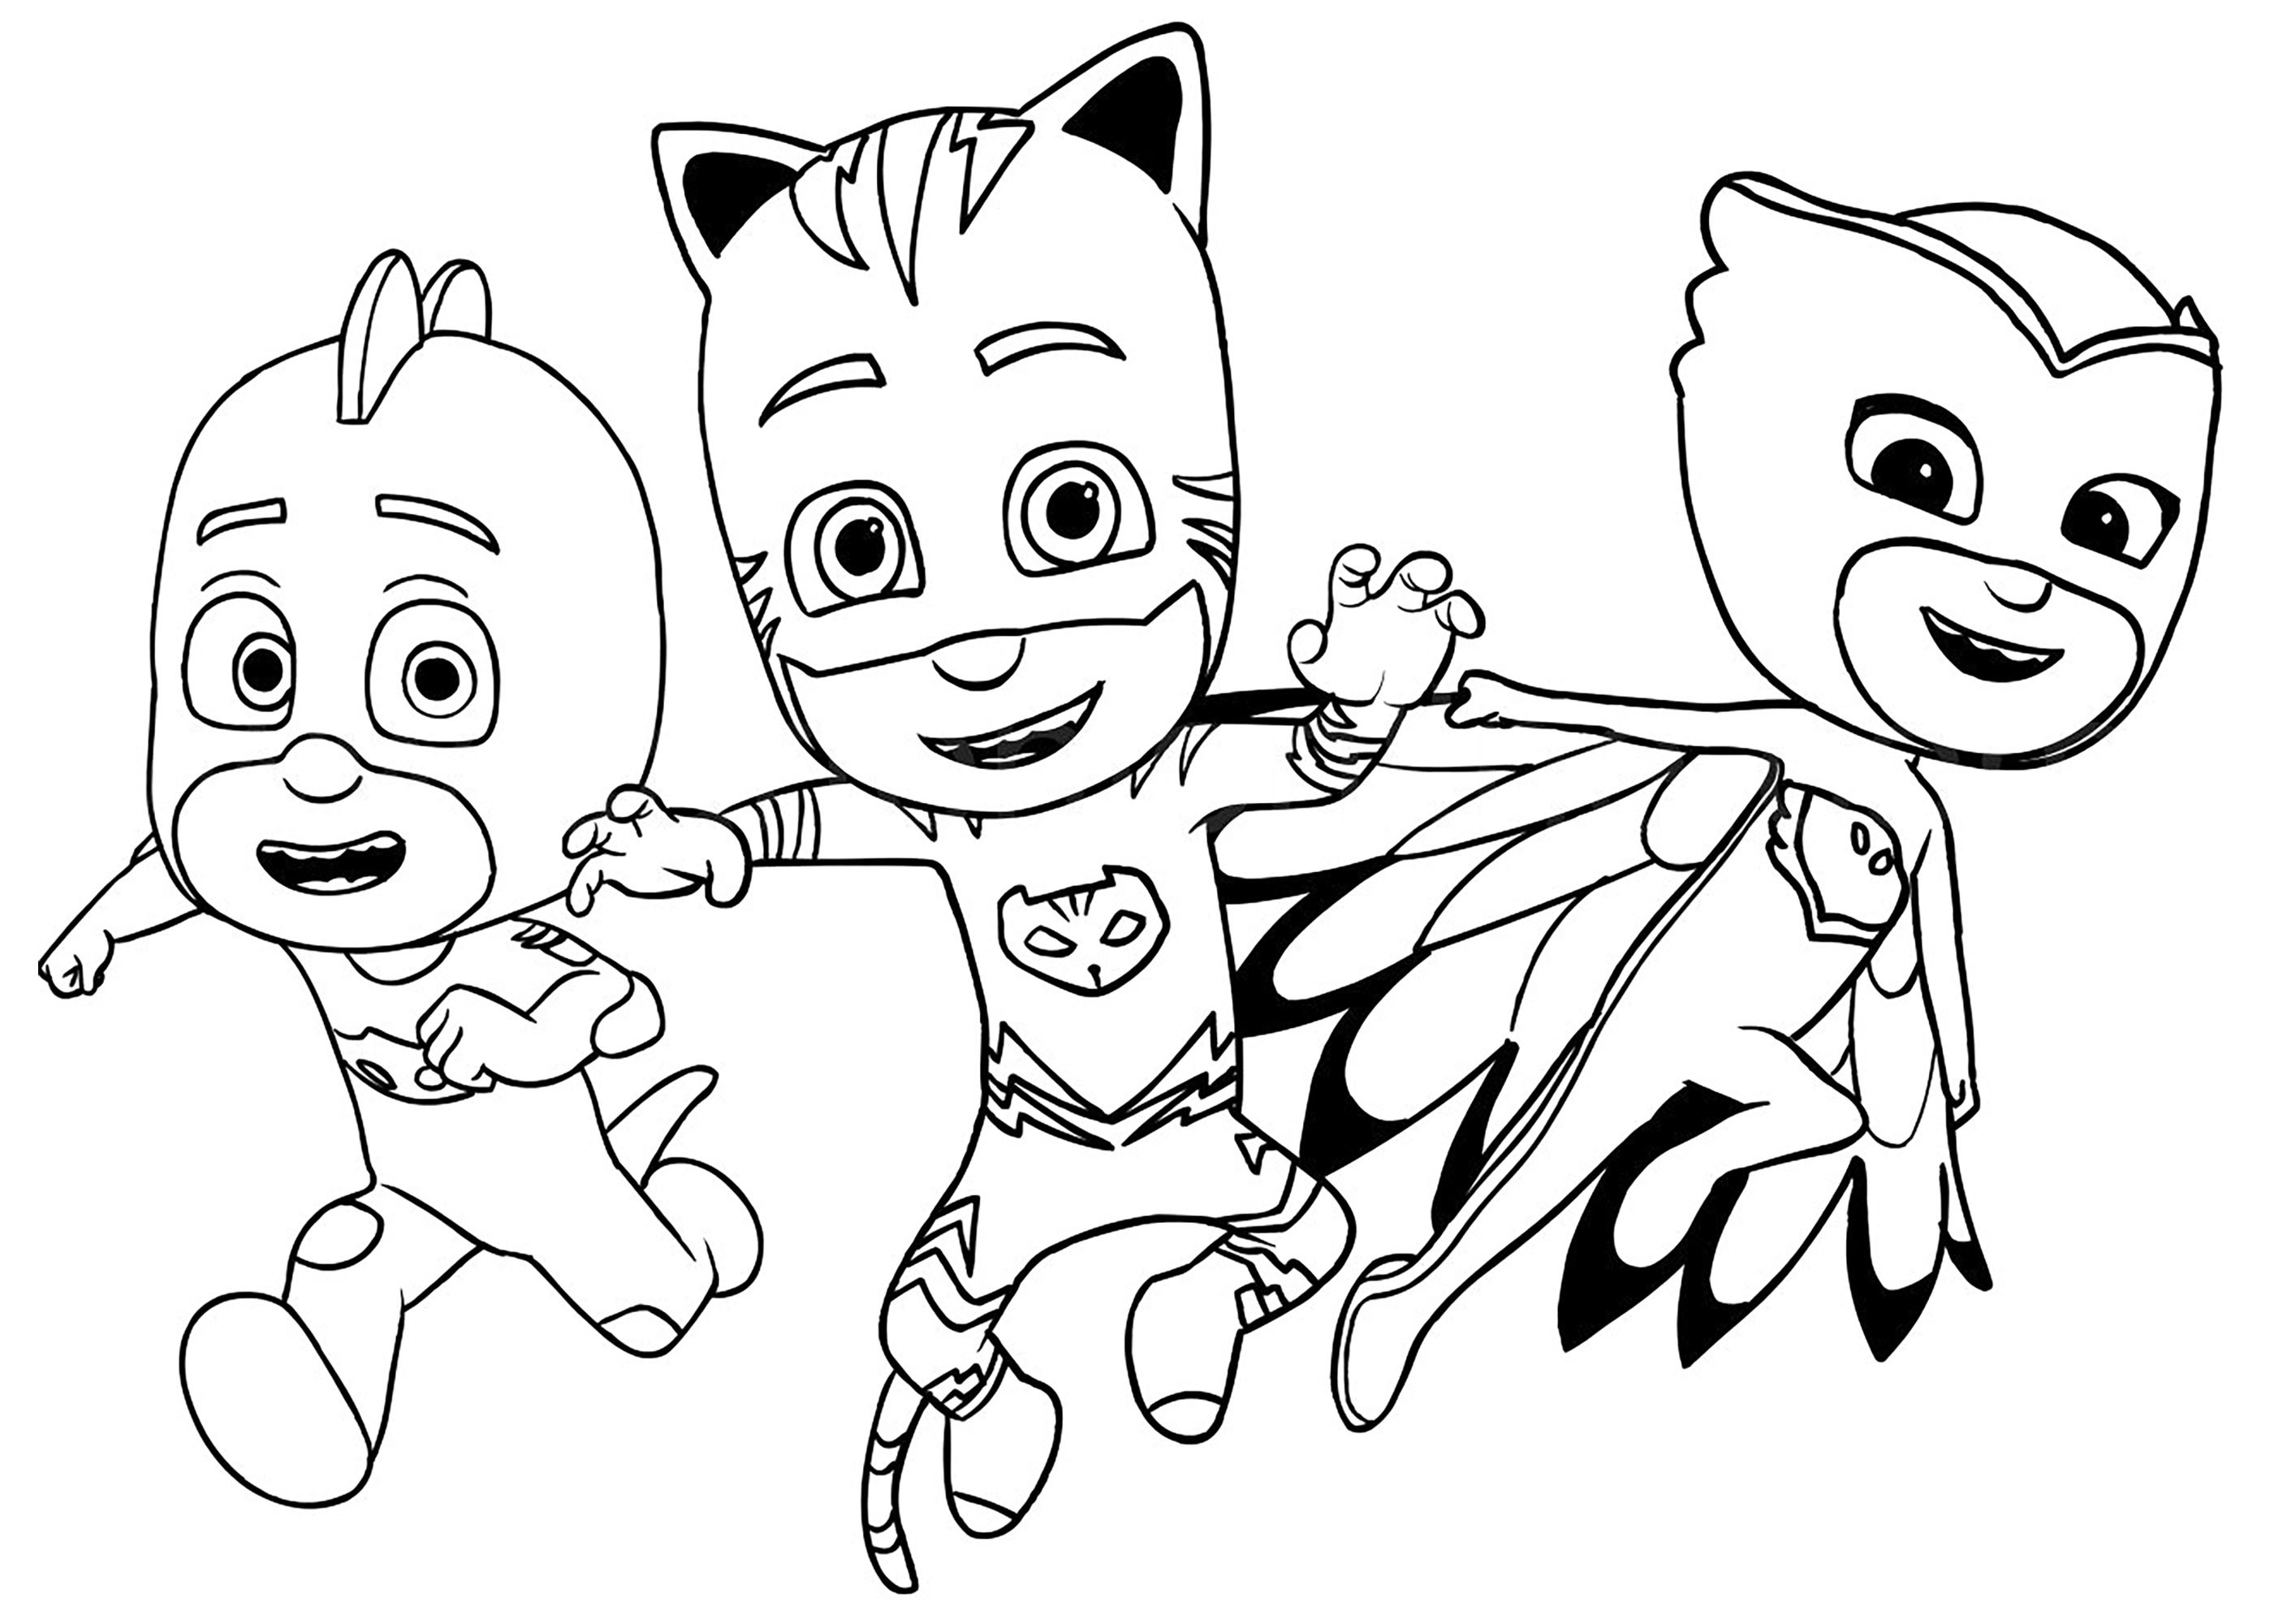 Pj Masks Coloring Pages To Print
 Pj masks to print for free PJ Masks Kids Coloring Pages